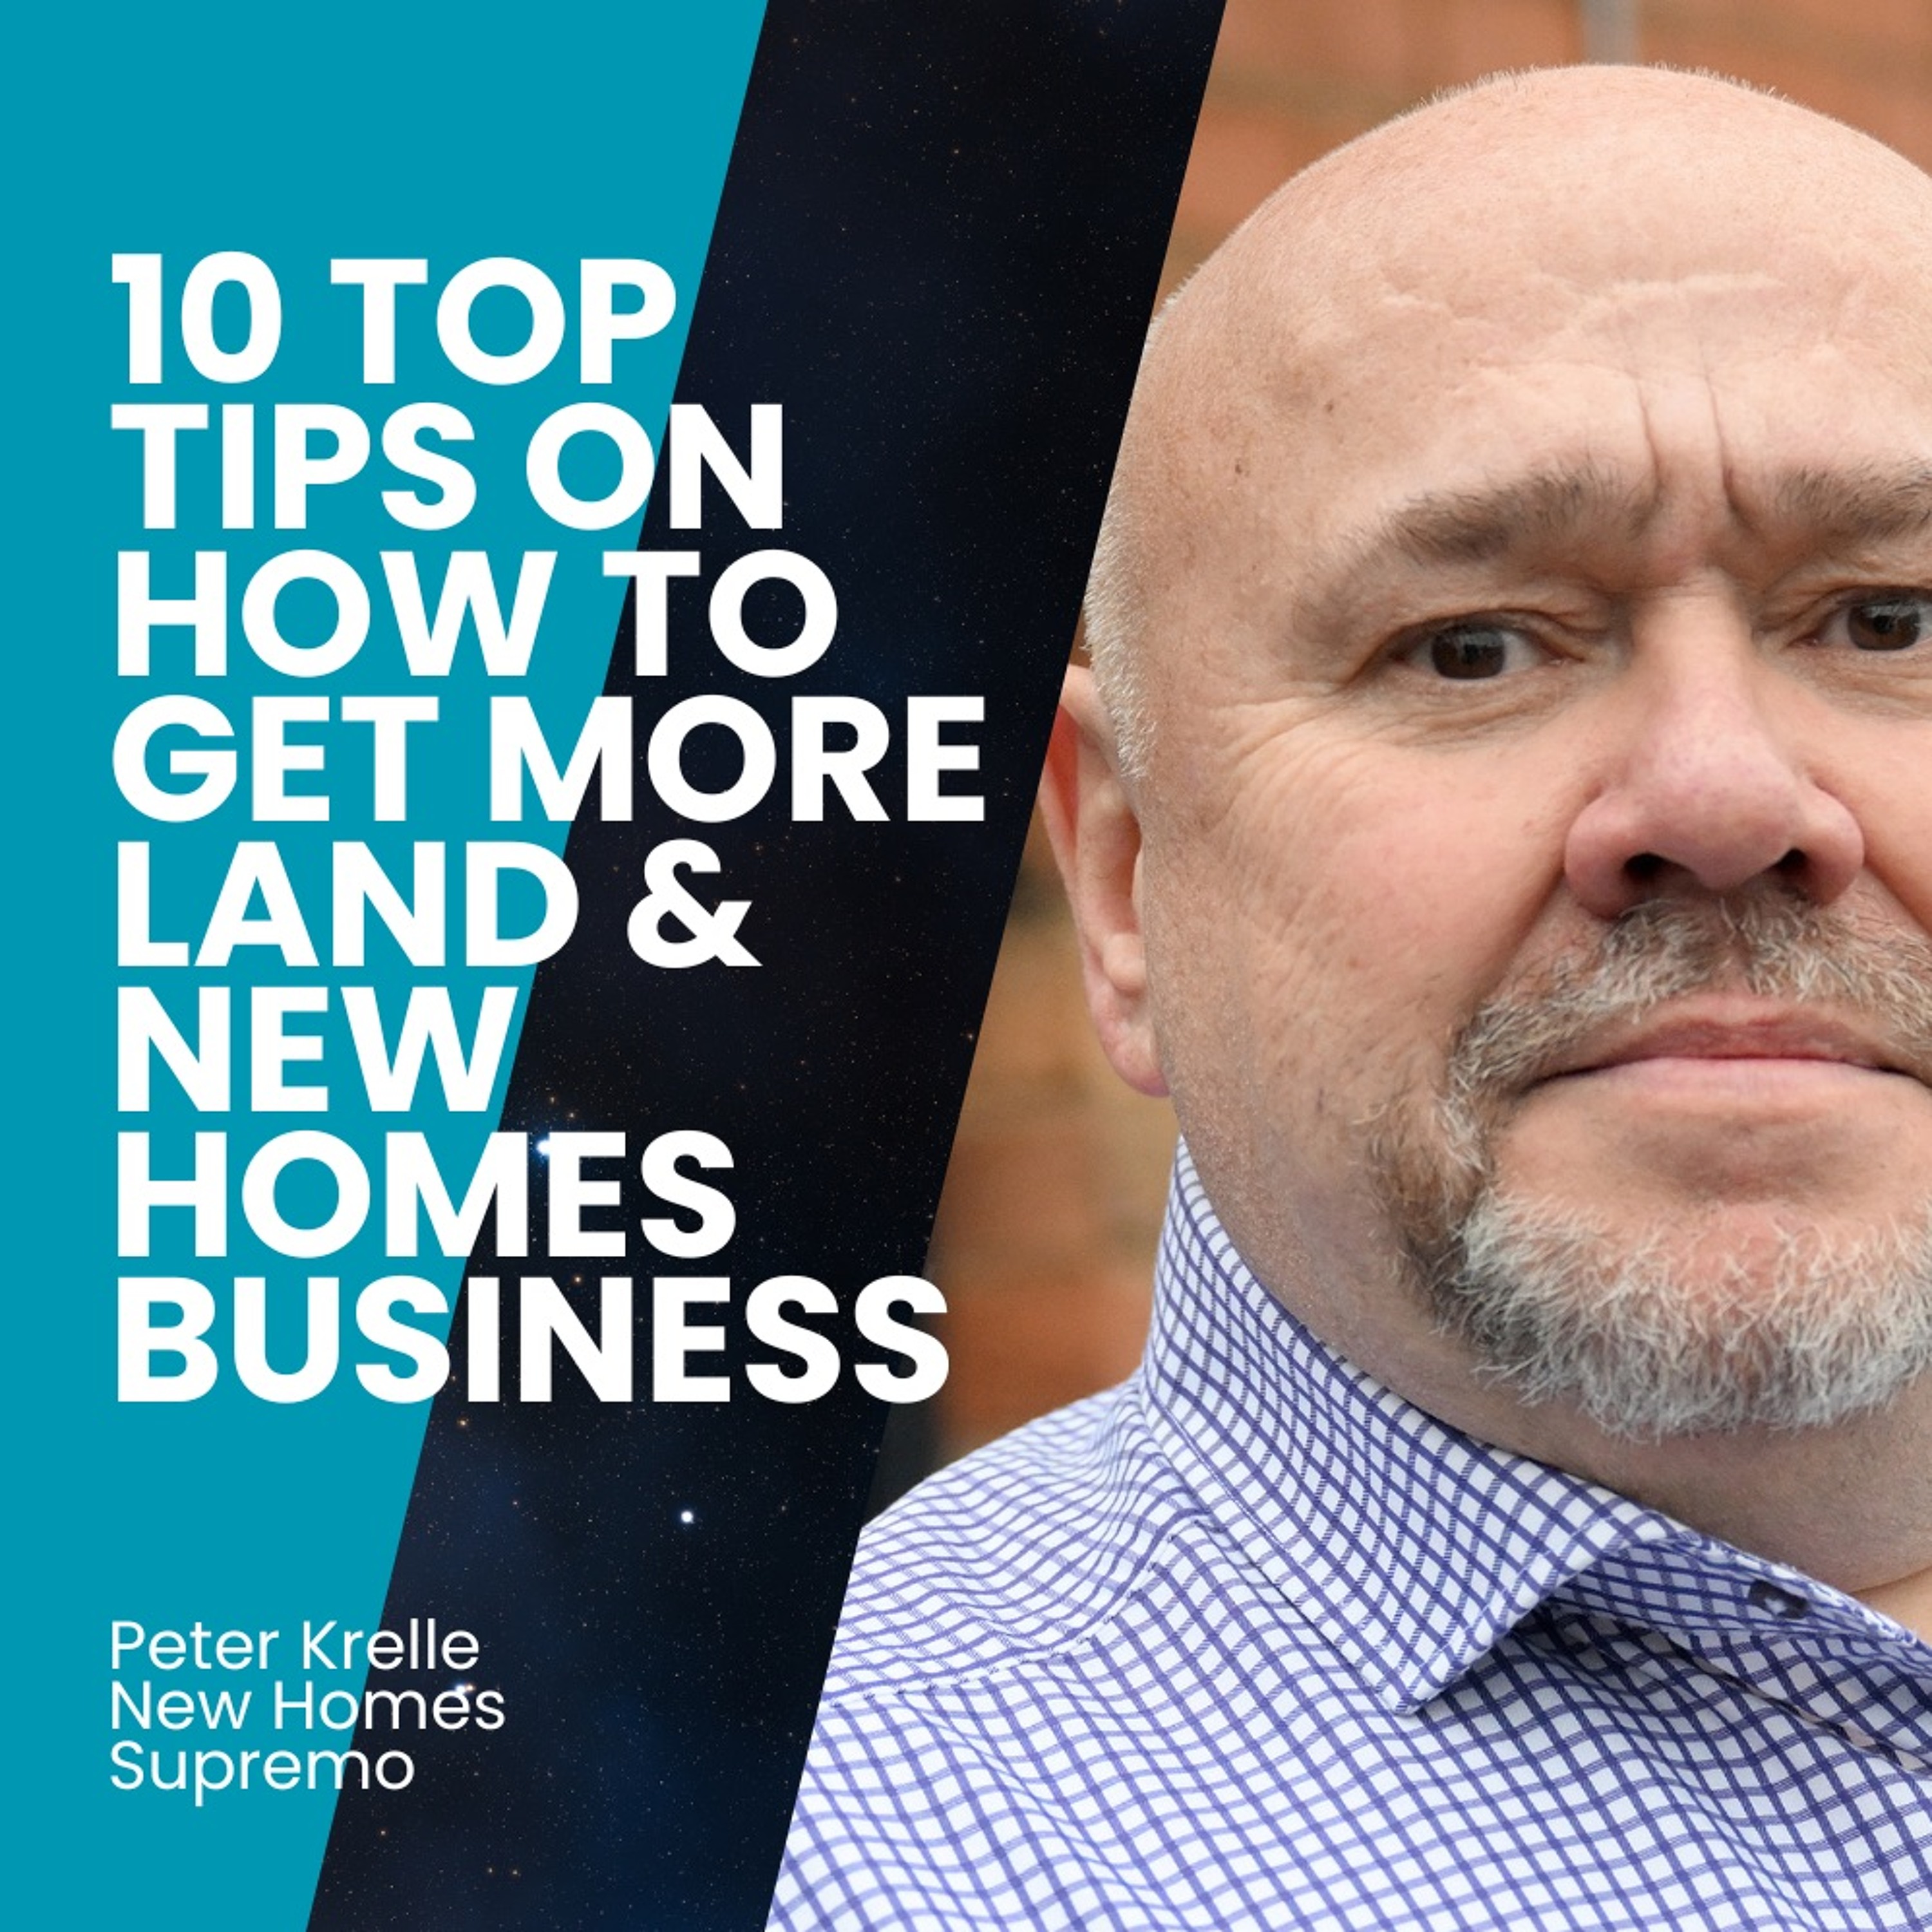 10 Top Tips On How To Get More Land And New Homes Business - Ep. 1843